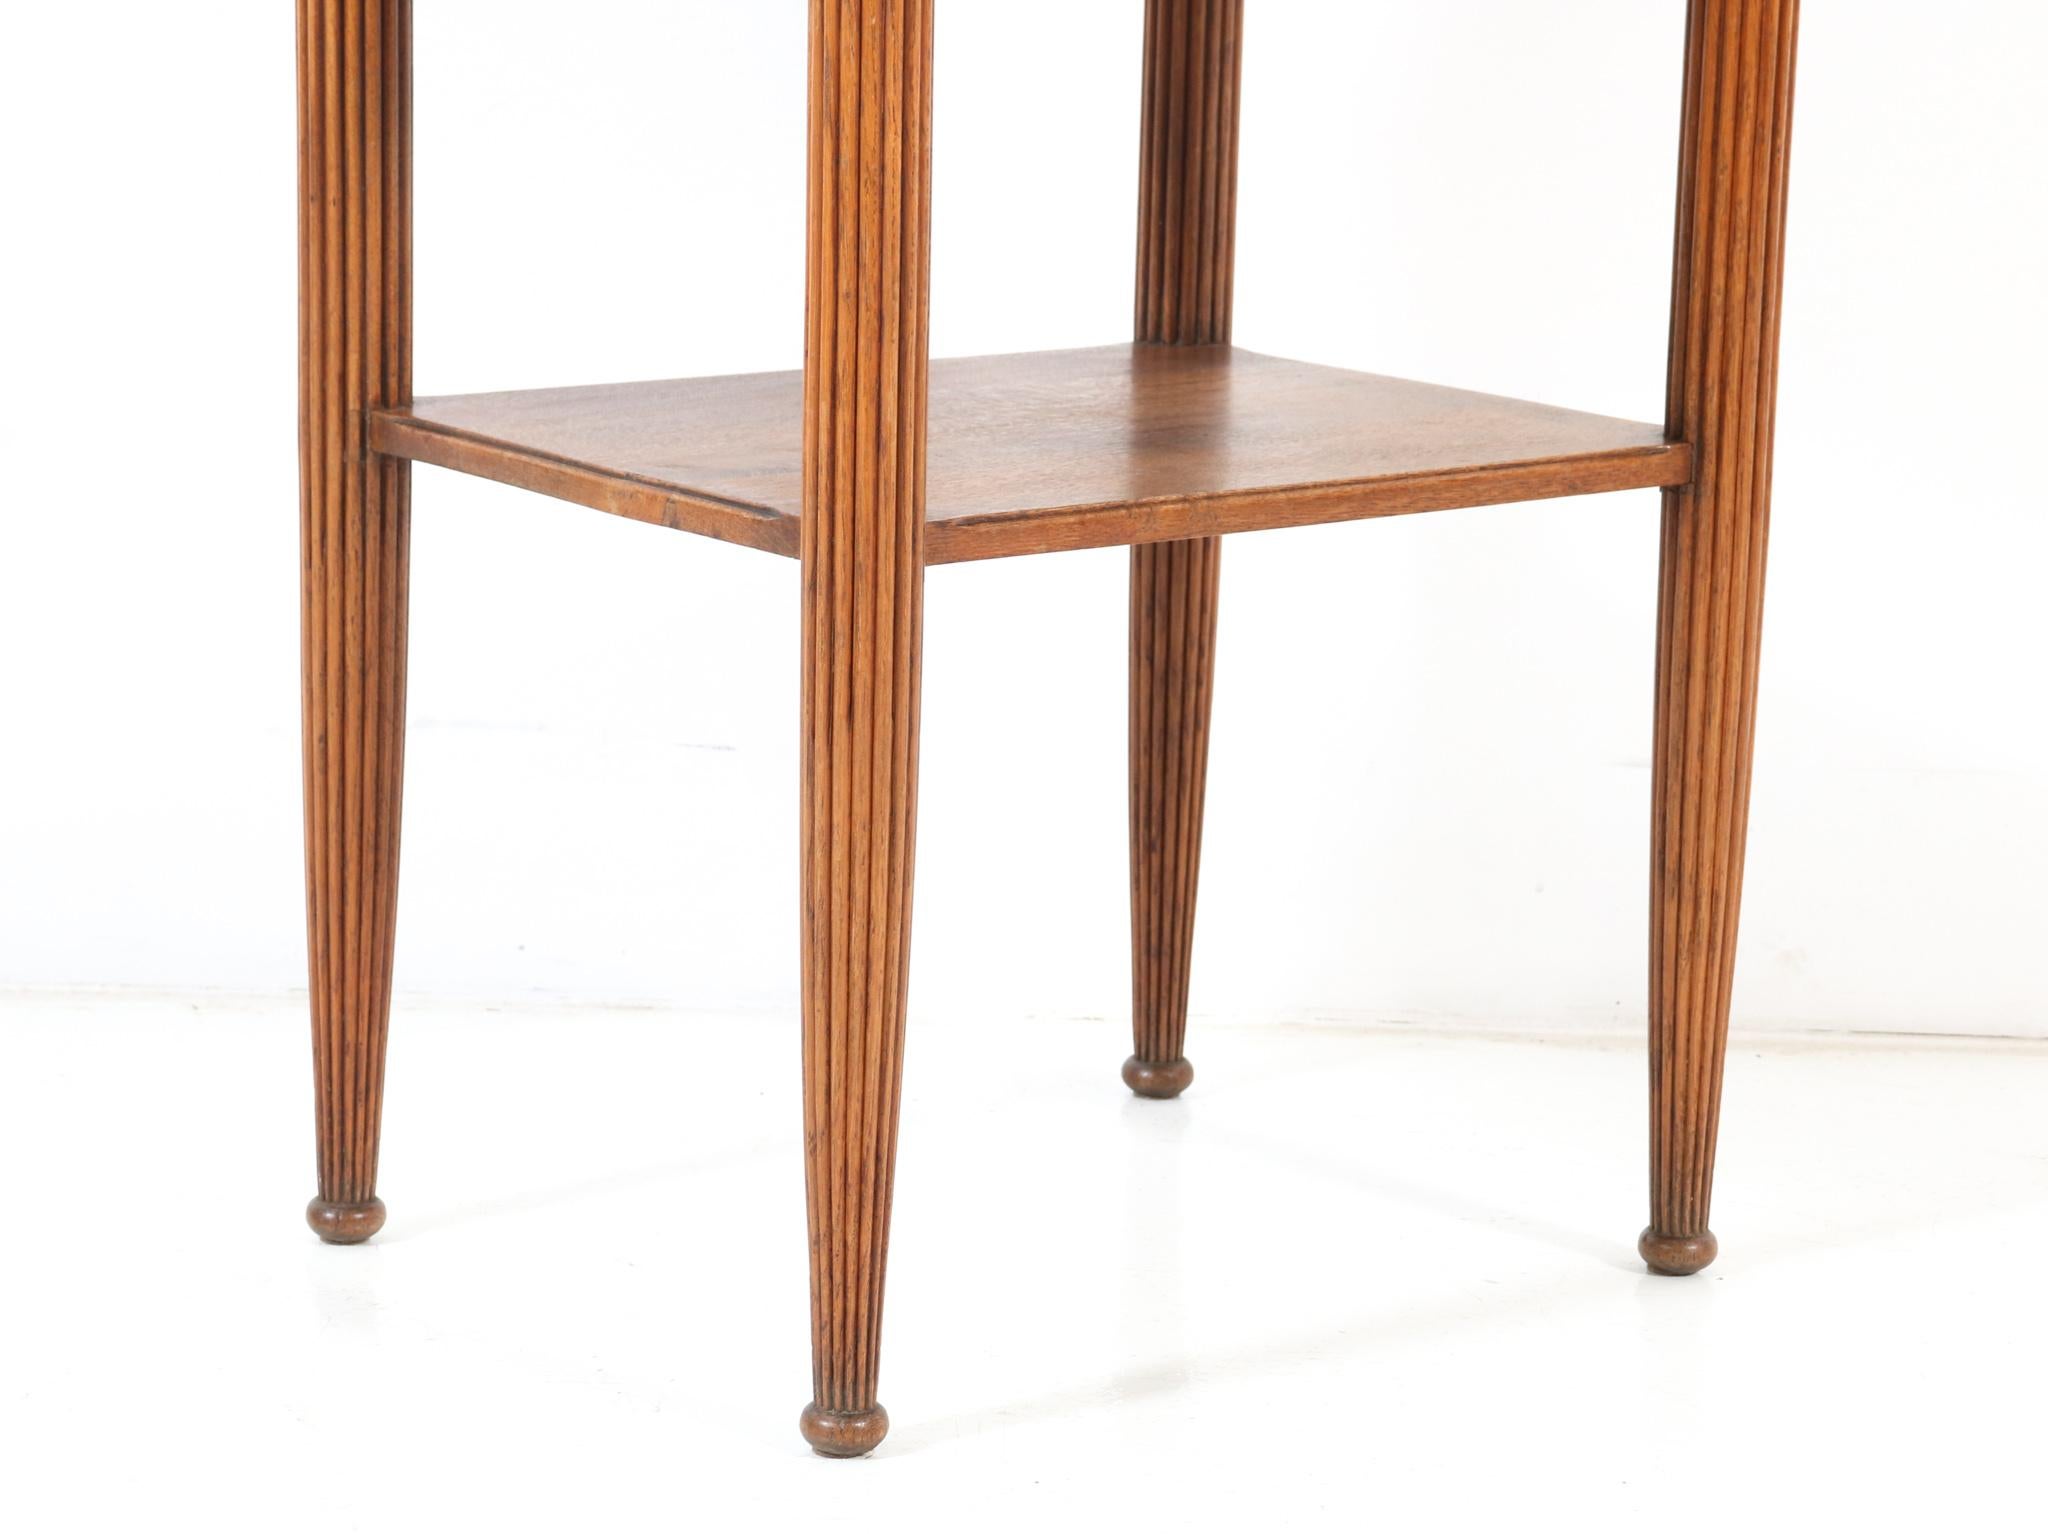 Oak Art Deco Side Table with Marble Top, 1930s For Sale 4